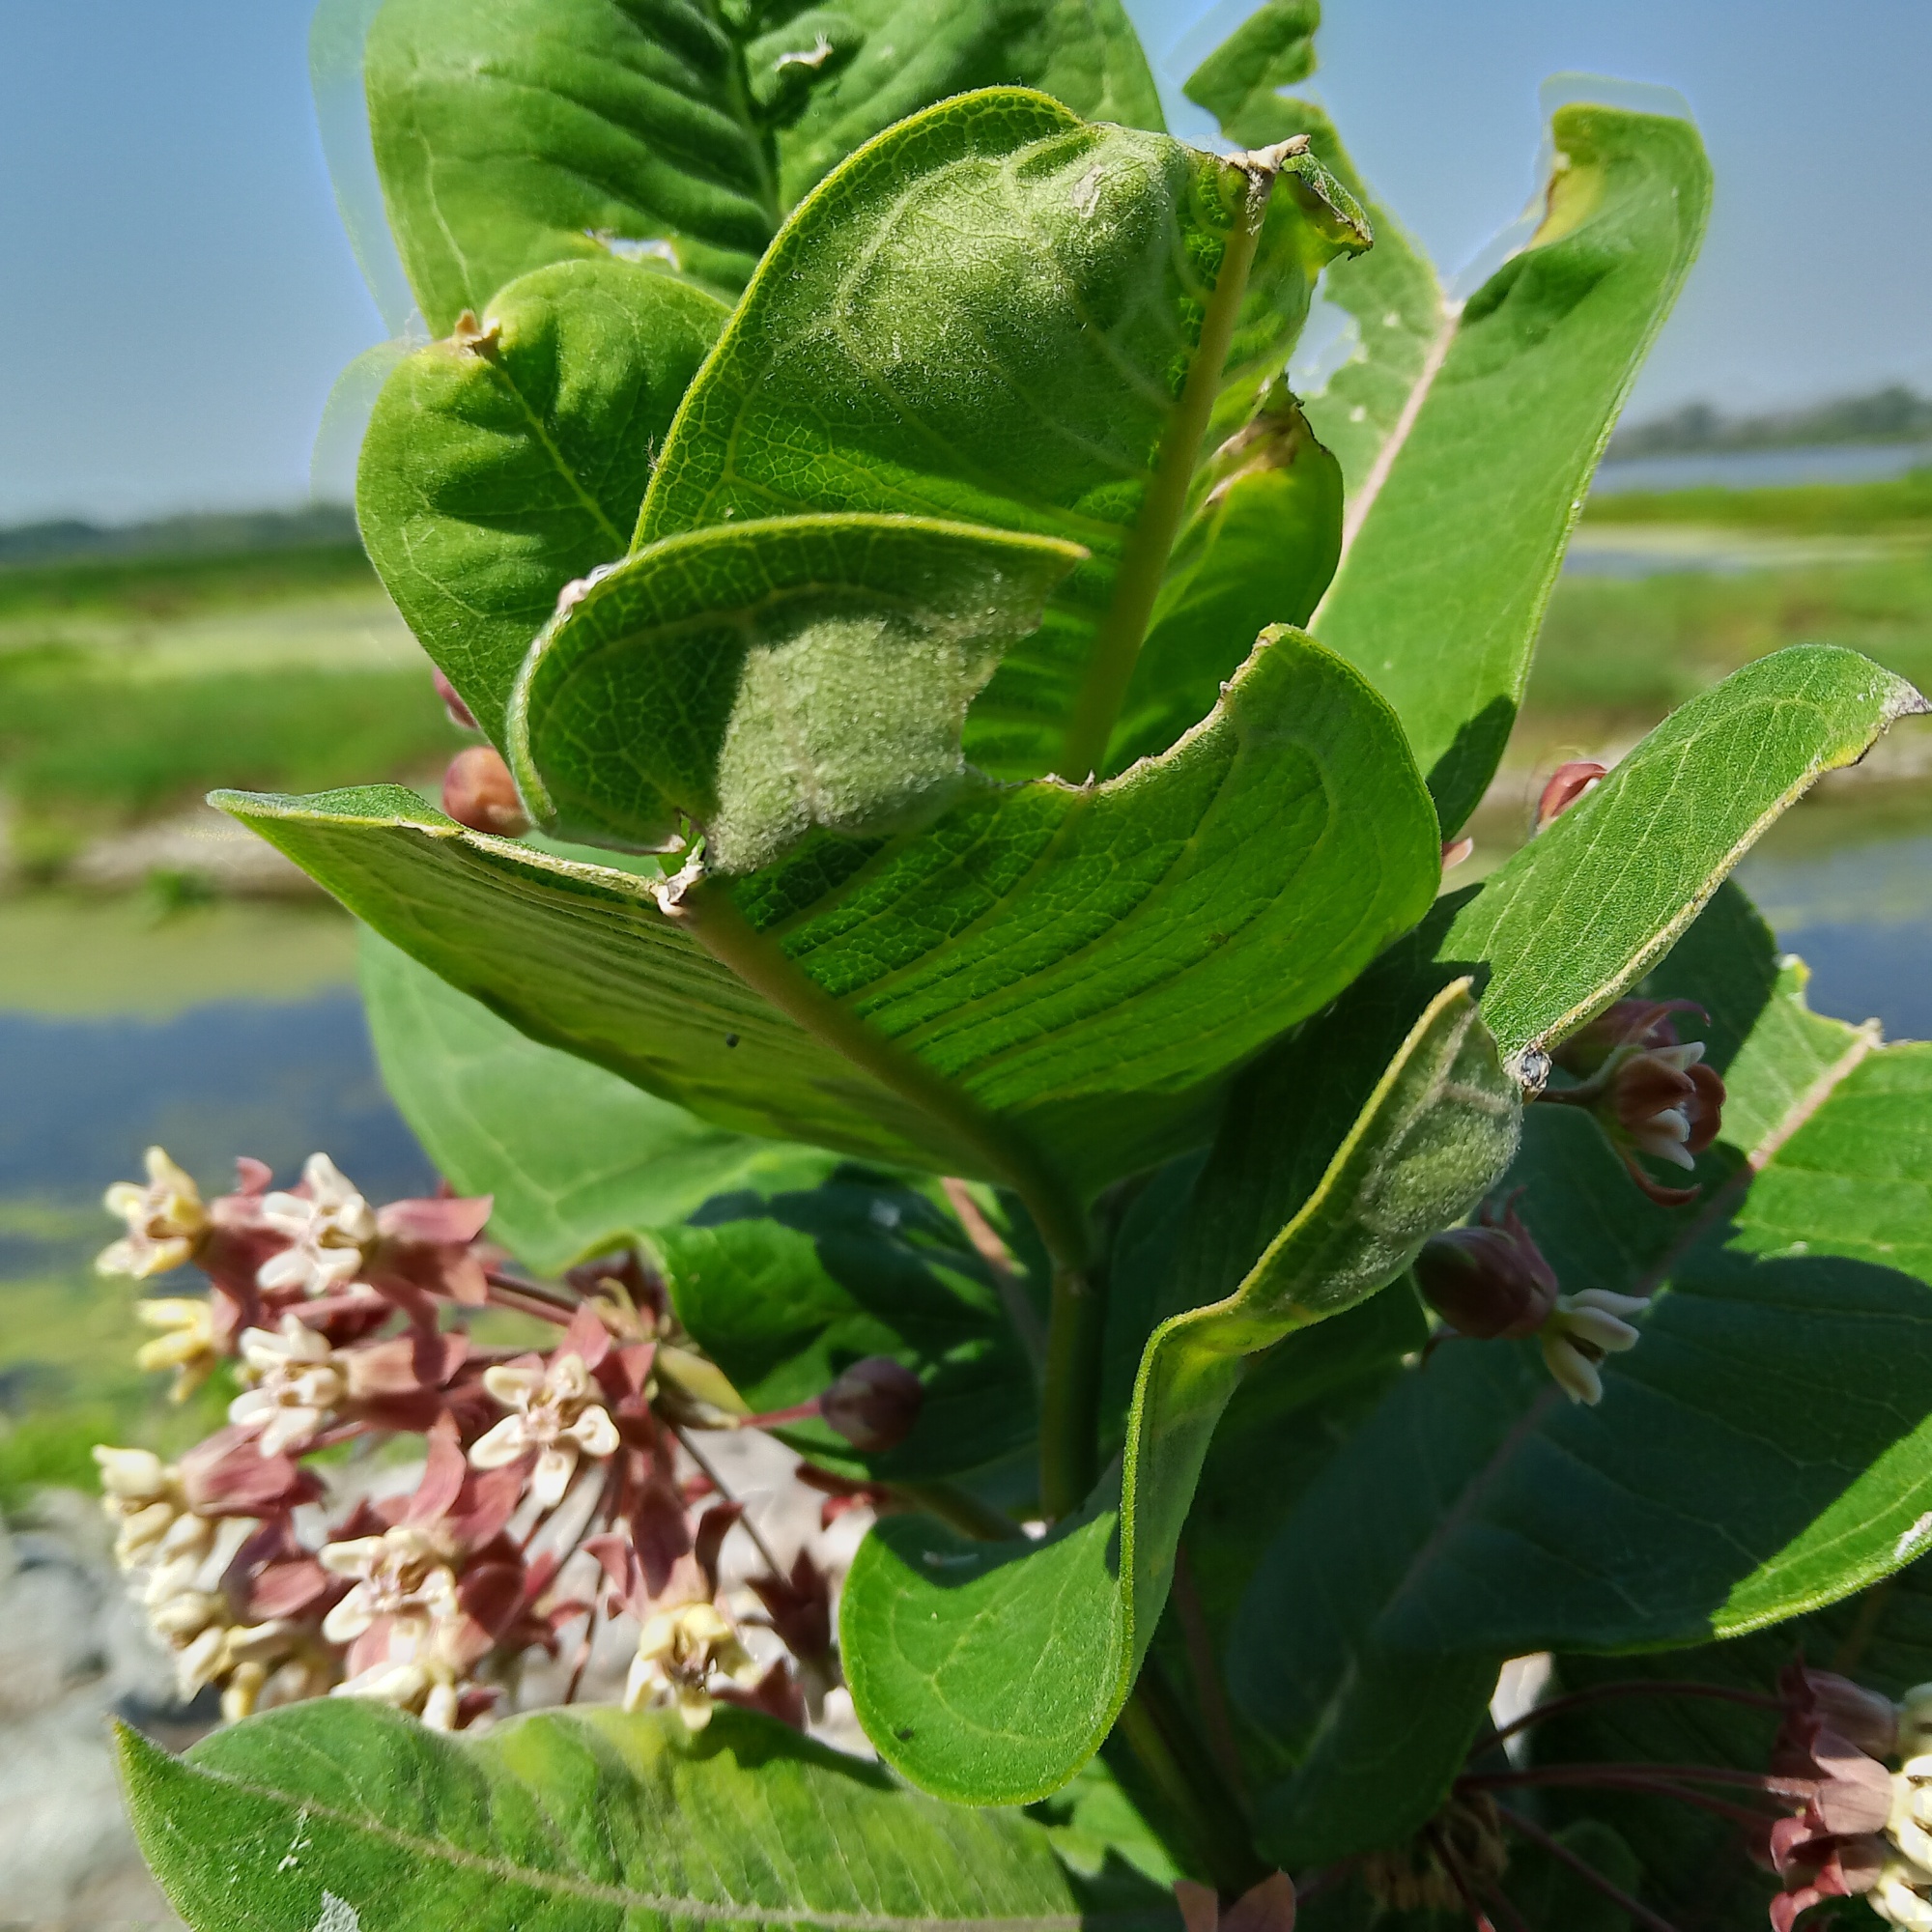 A closeup of a plant with large green leaves and small pink flowers.